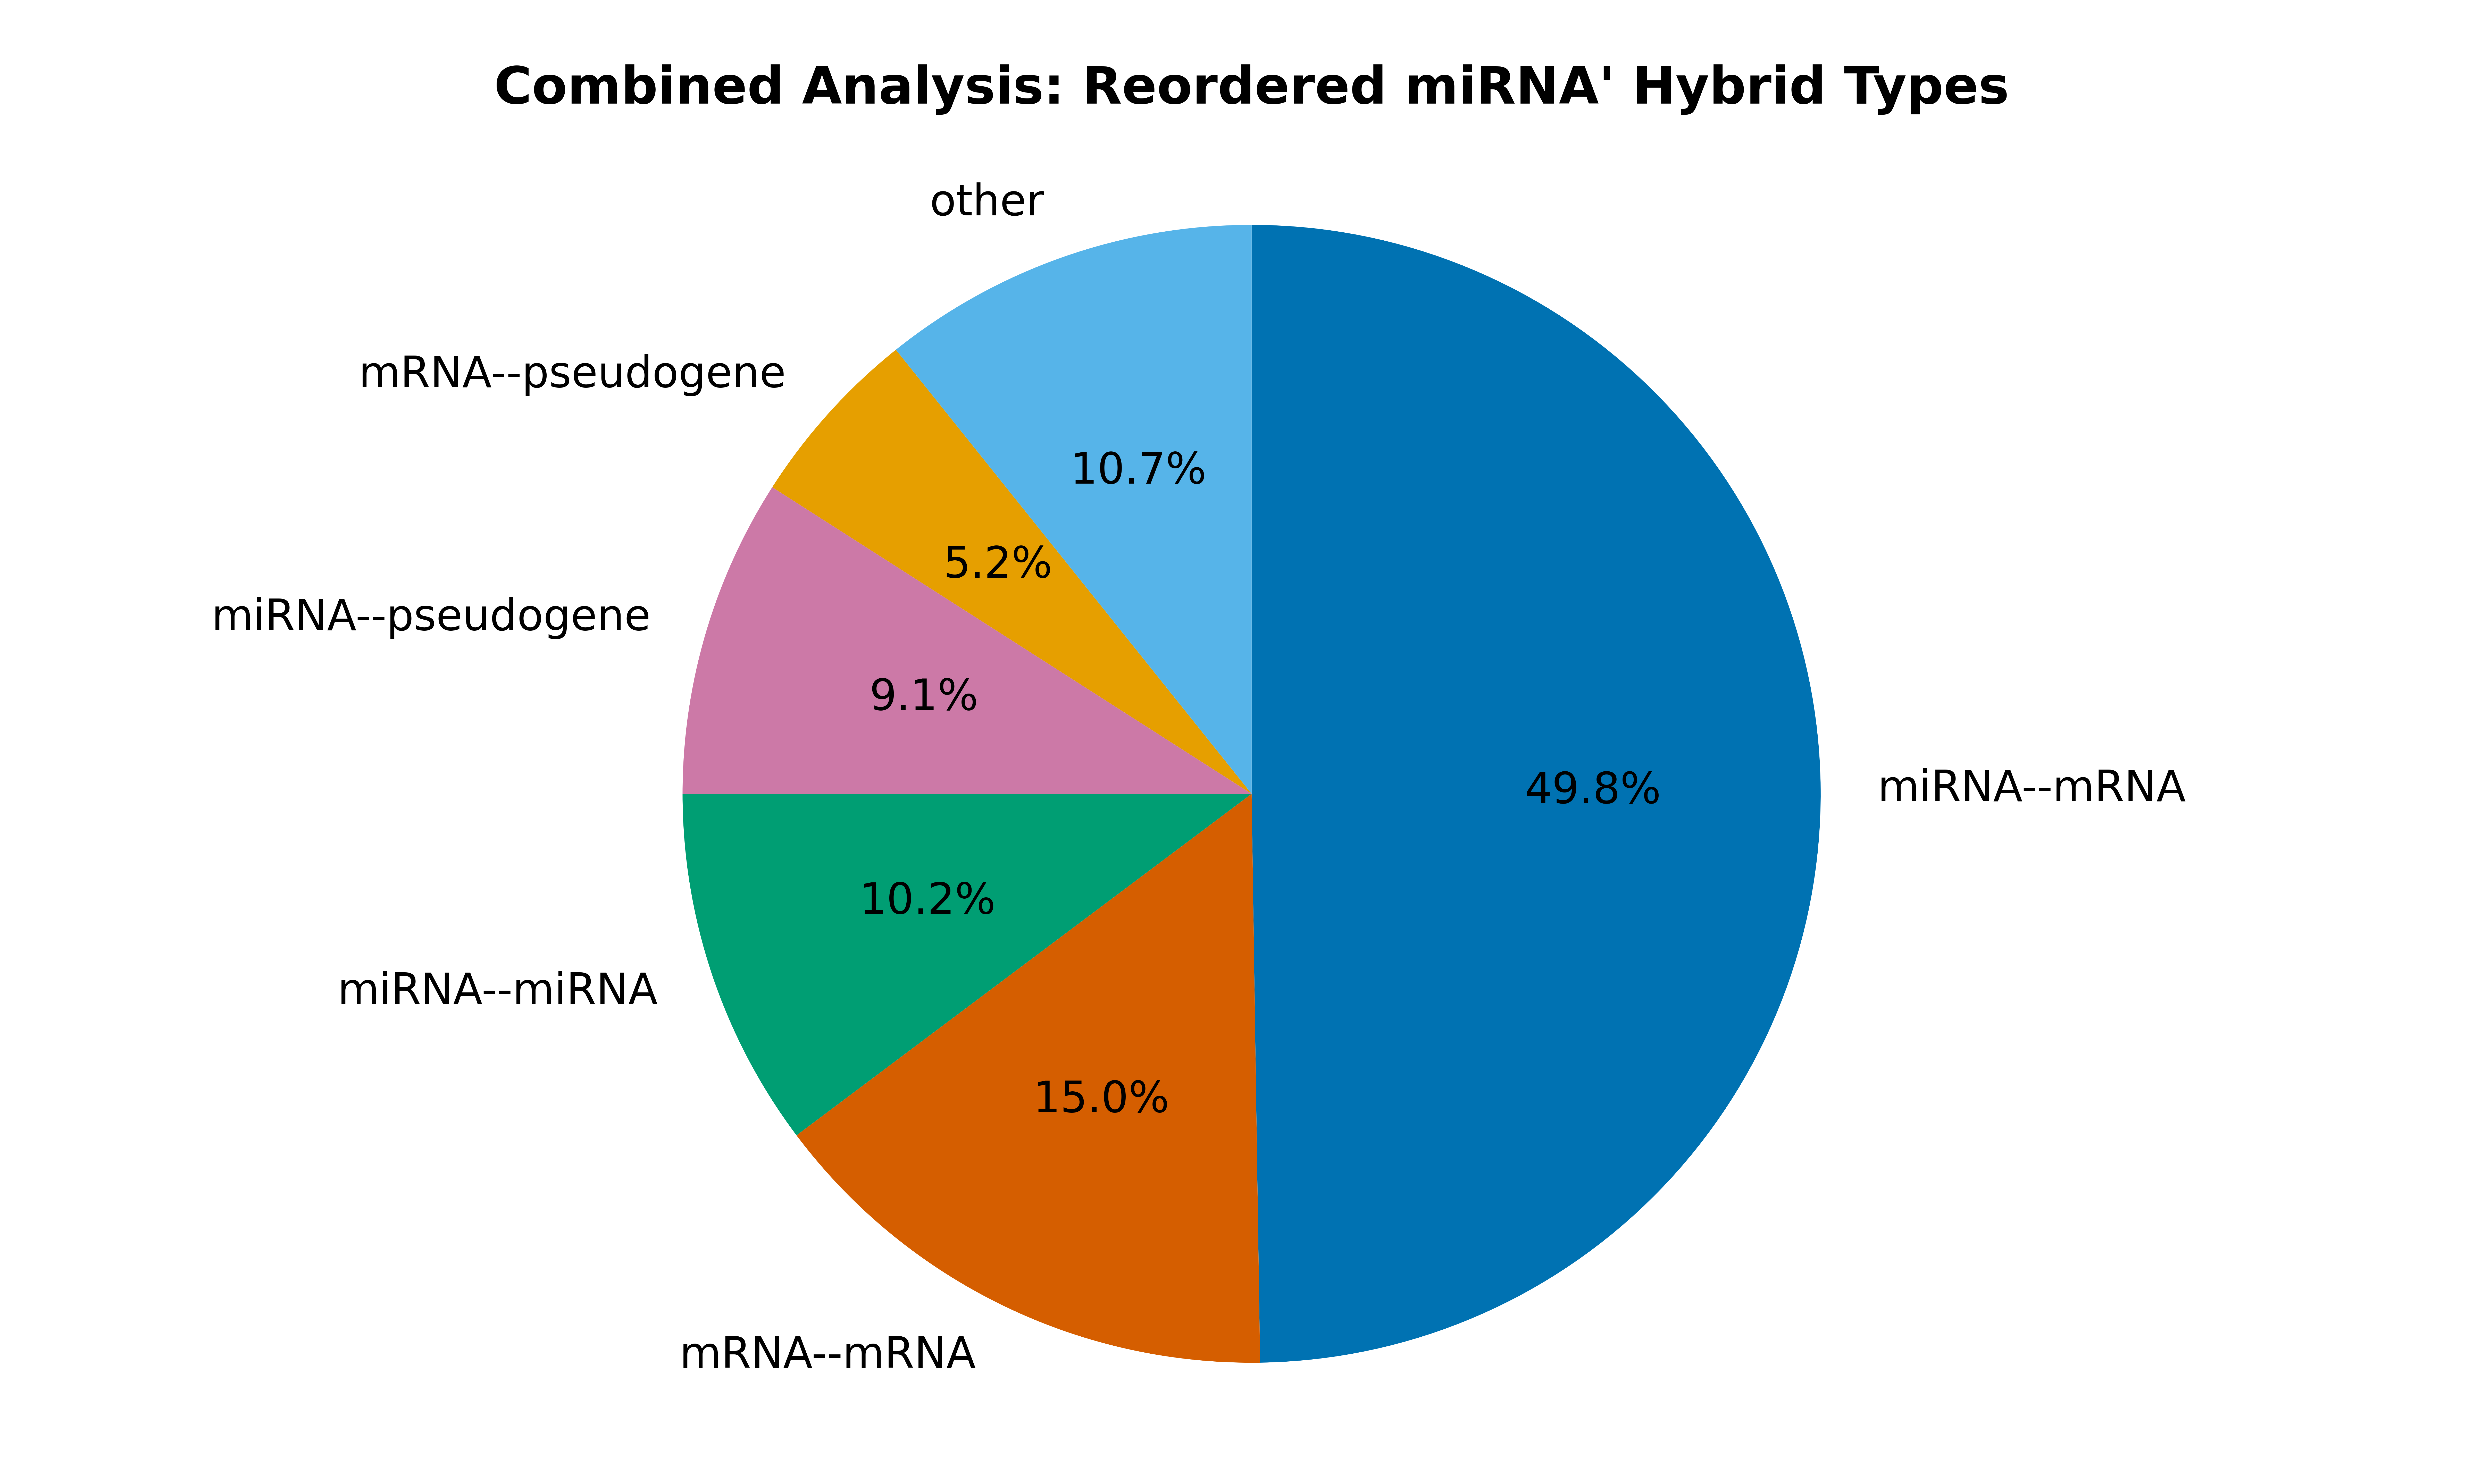 _images/combined_analysis_types_mirna_hybrids.png